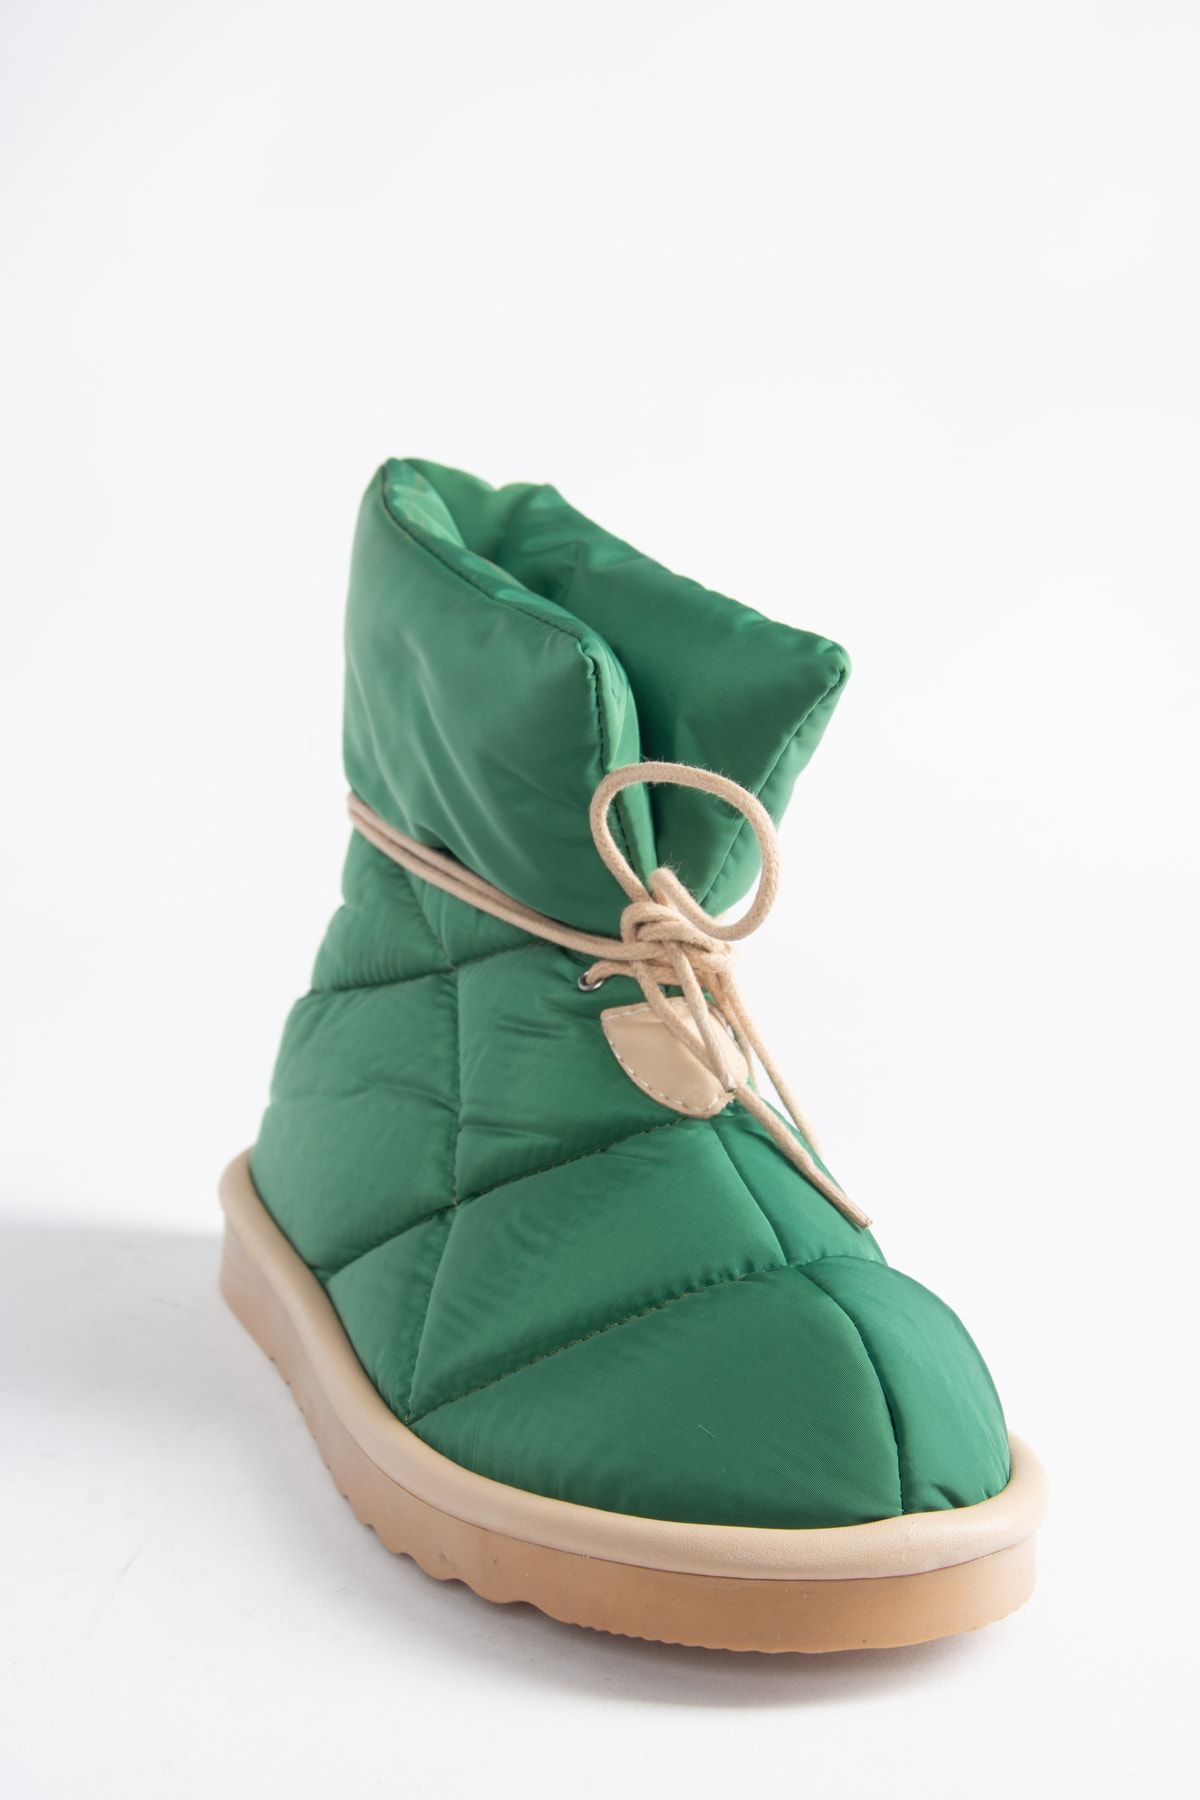 Fox Shoes Ankle Boots - Green - Flat - Trendyol